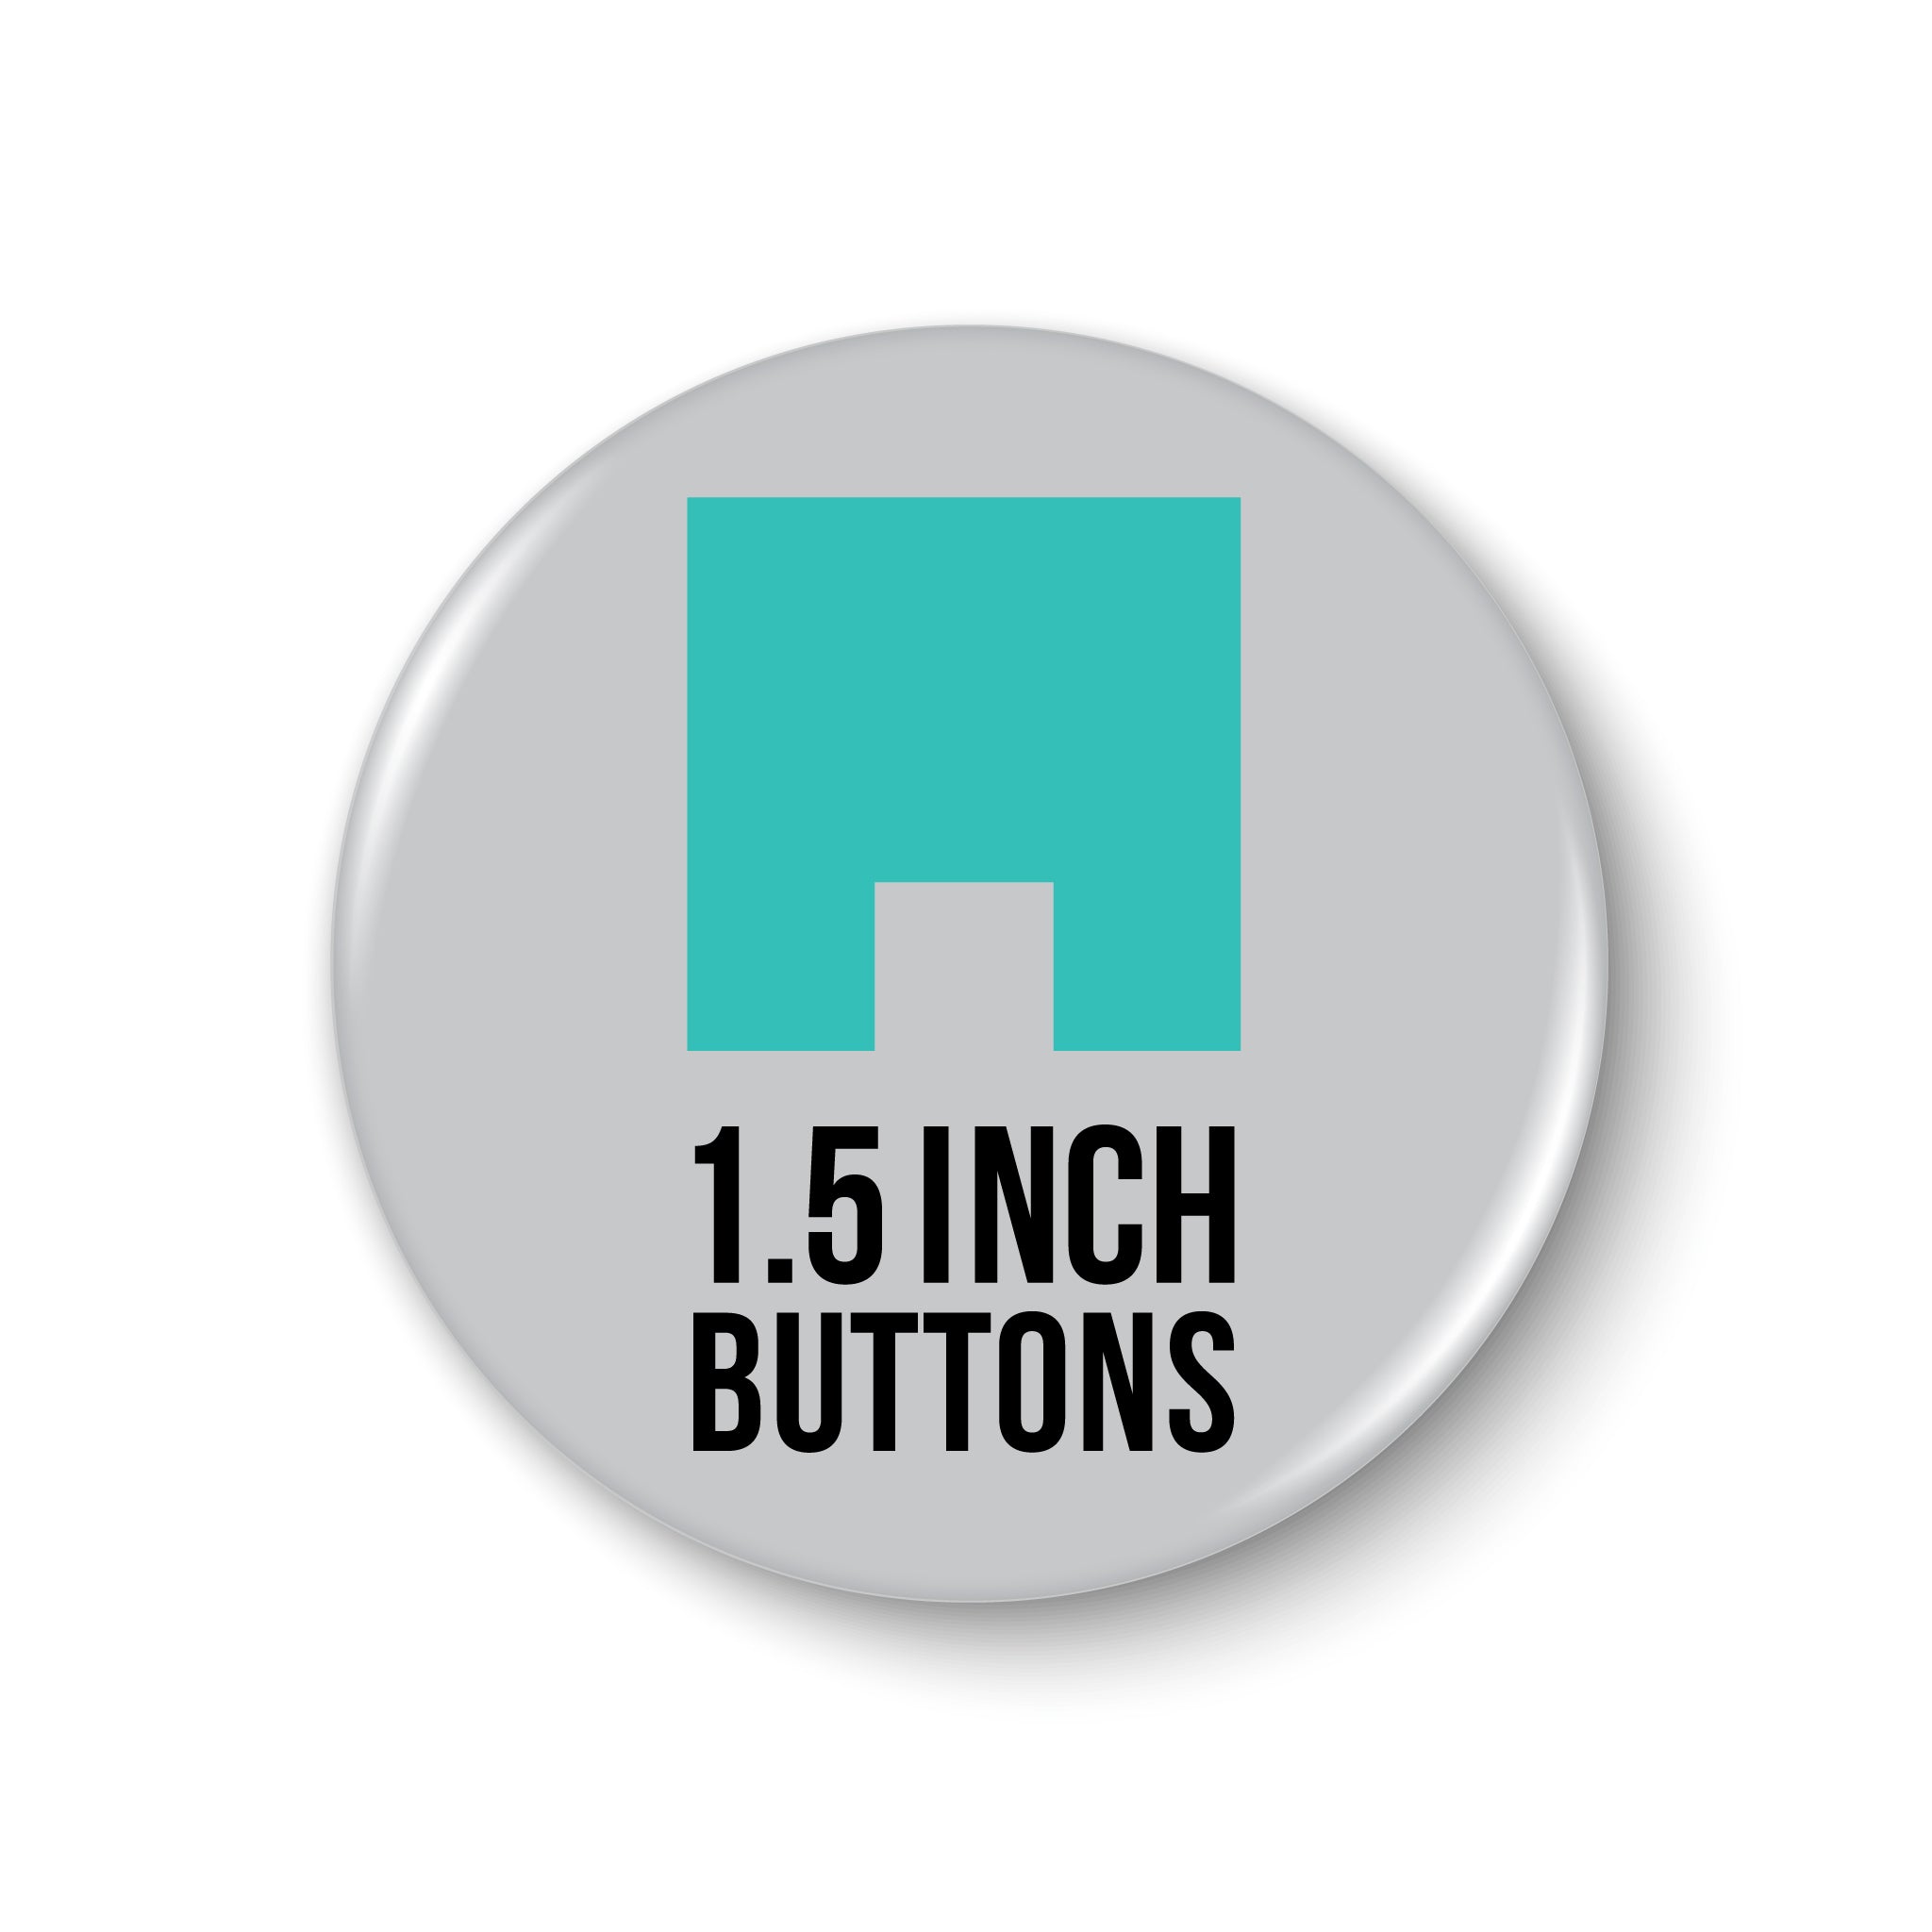 1.5" BUTTONS